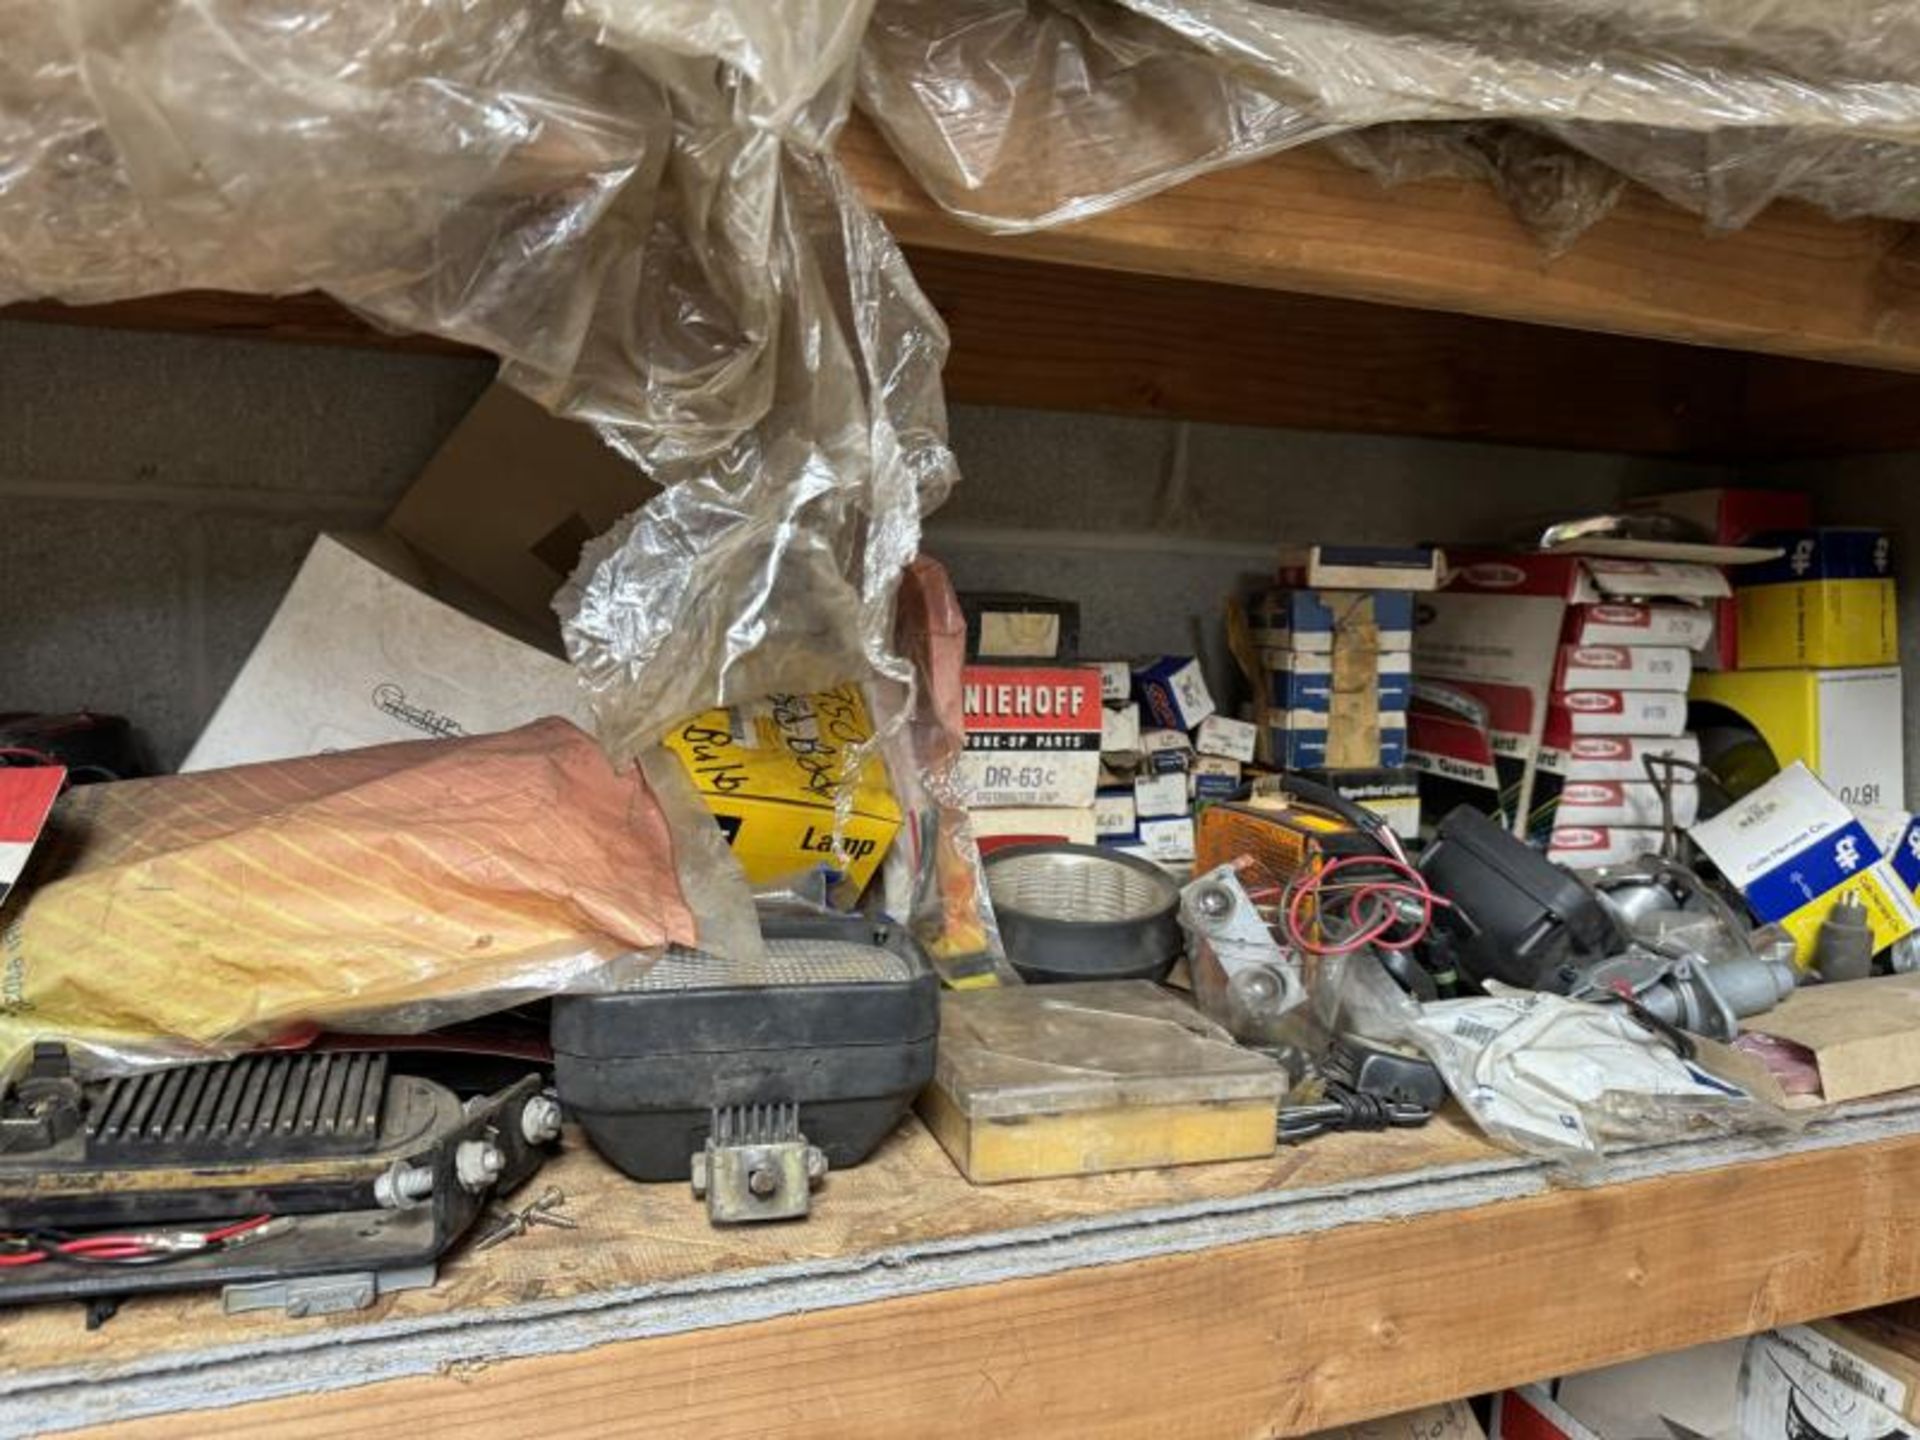 Contents of Shelving Unit (NOT SHELF) Including: Spray Paint, Concrete Adhesive, Vehicles Fuses, Veh - Image 7 of 11